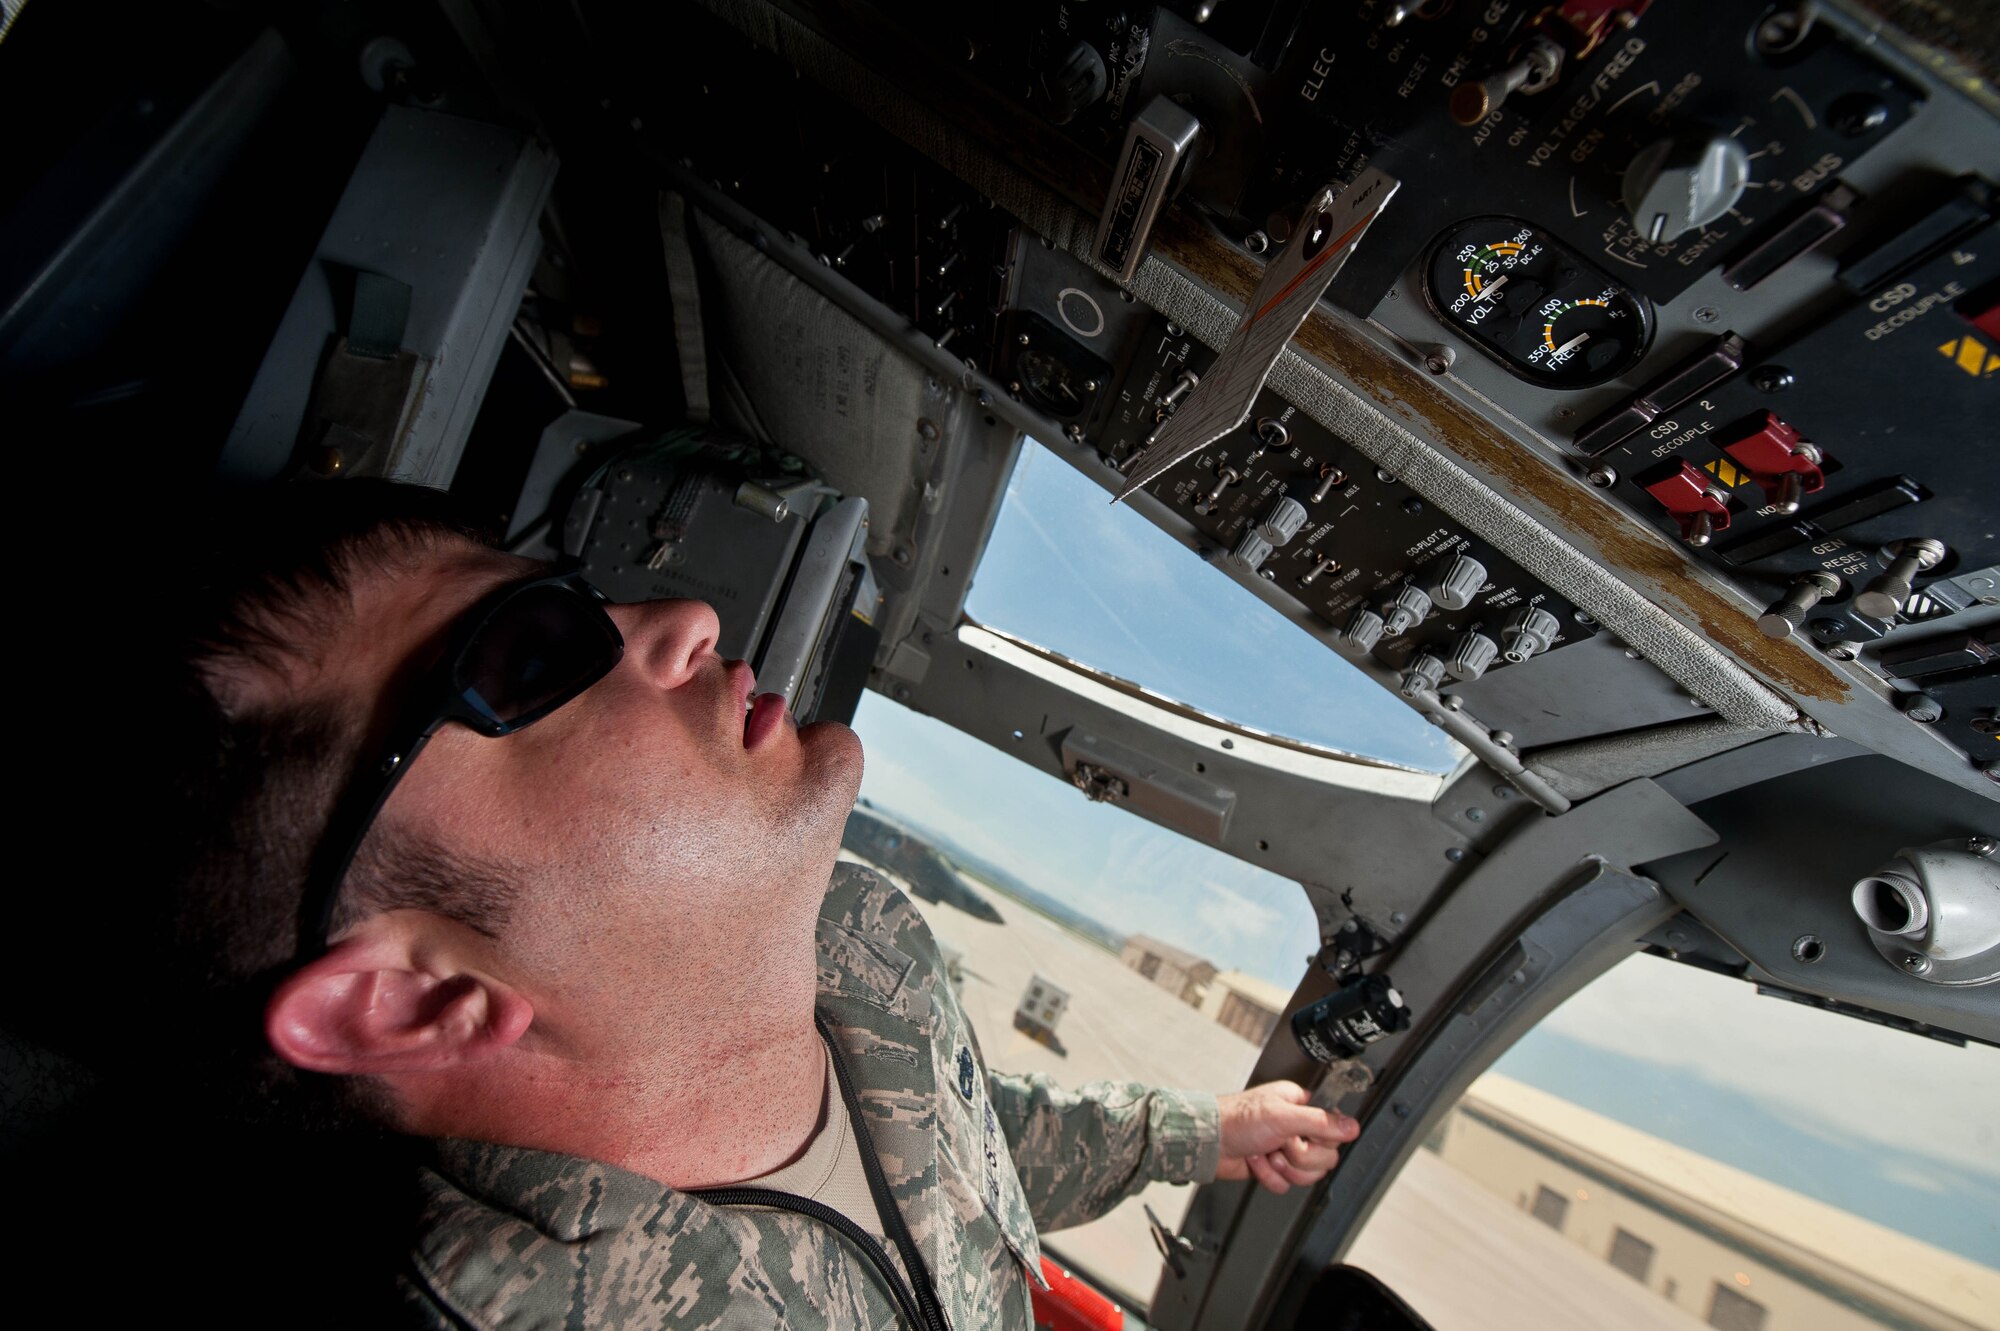 Staff Sgt. Patrick Gesick, 28th Aircraft Maintenance Squadron instrument flight controls lead technician, checks the hydraulic quantity and pressure in a B-1 bomber cockpit during routine maintenance at Ellsworth Air Force Base, S.D., May 15, 2013. IFC Airmen are tasked to maintain a myriad of mission critical systems on the base’s B-1 fleet, including flight and offensive controls, communications and navigation. (U.S. Air Force photo by Airman 1st Class Zachary Hada/Released)